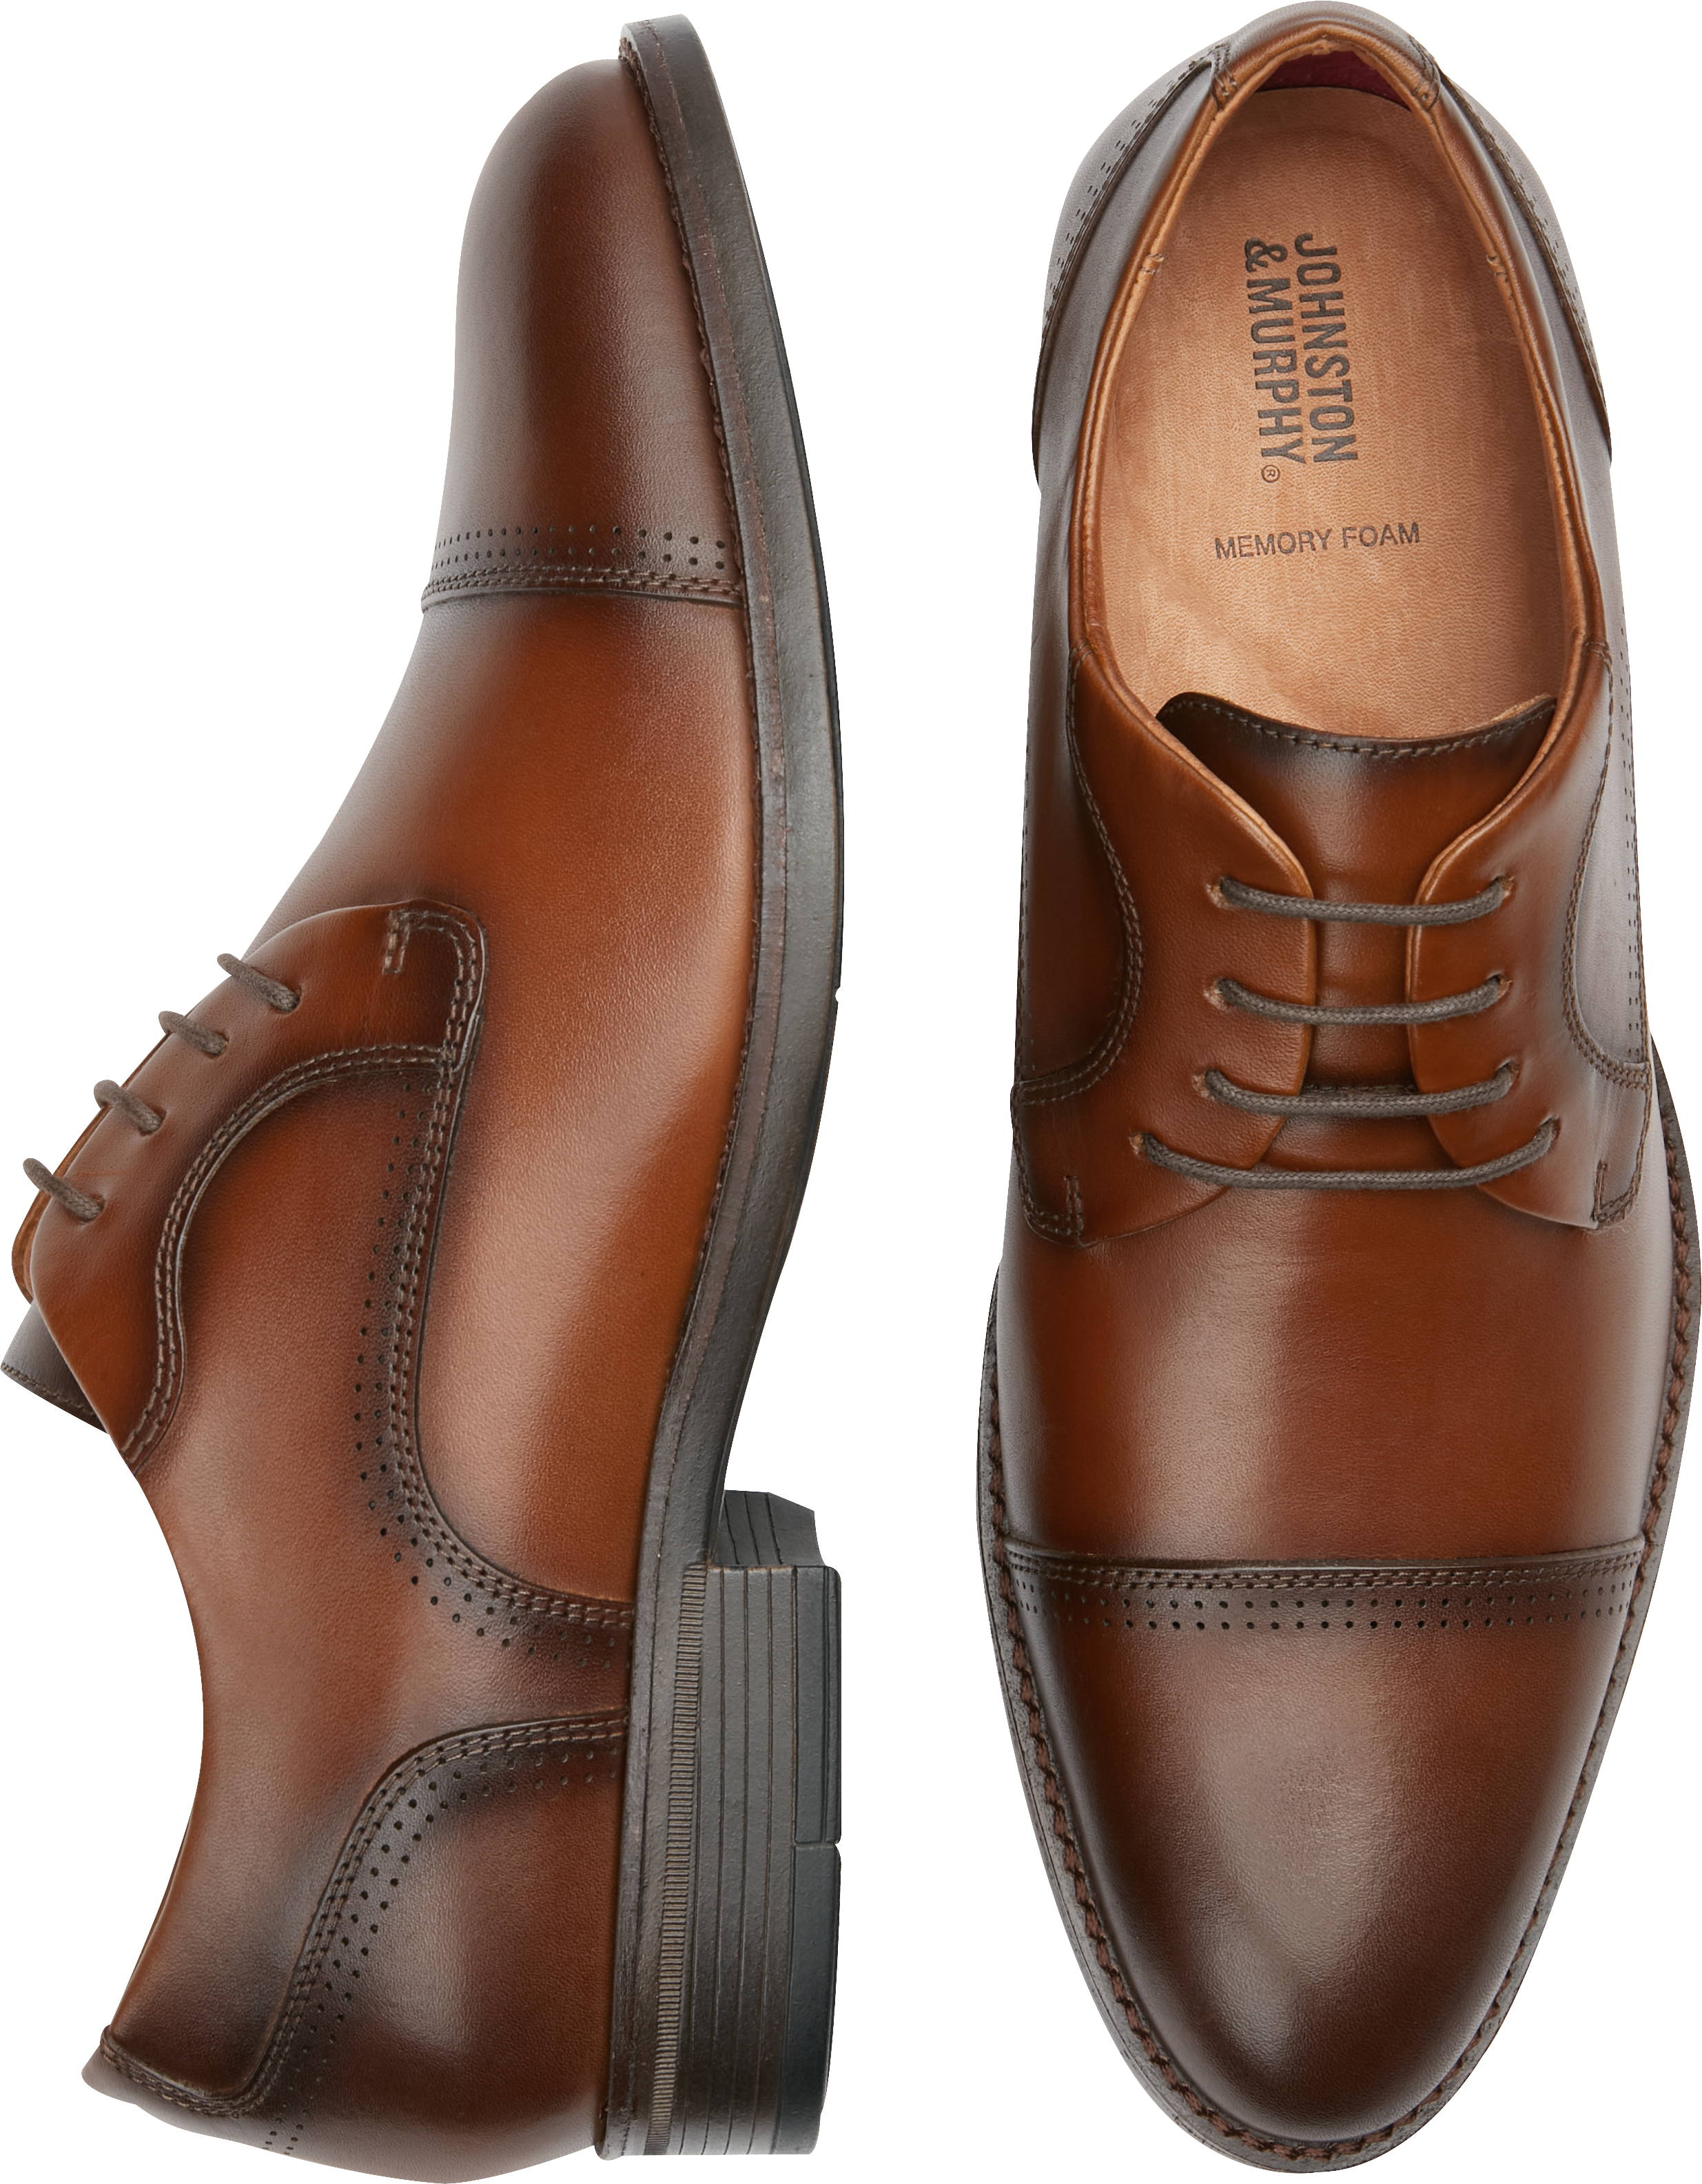 johnston and murphy dress shoes